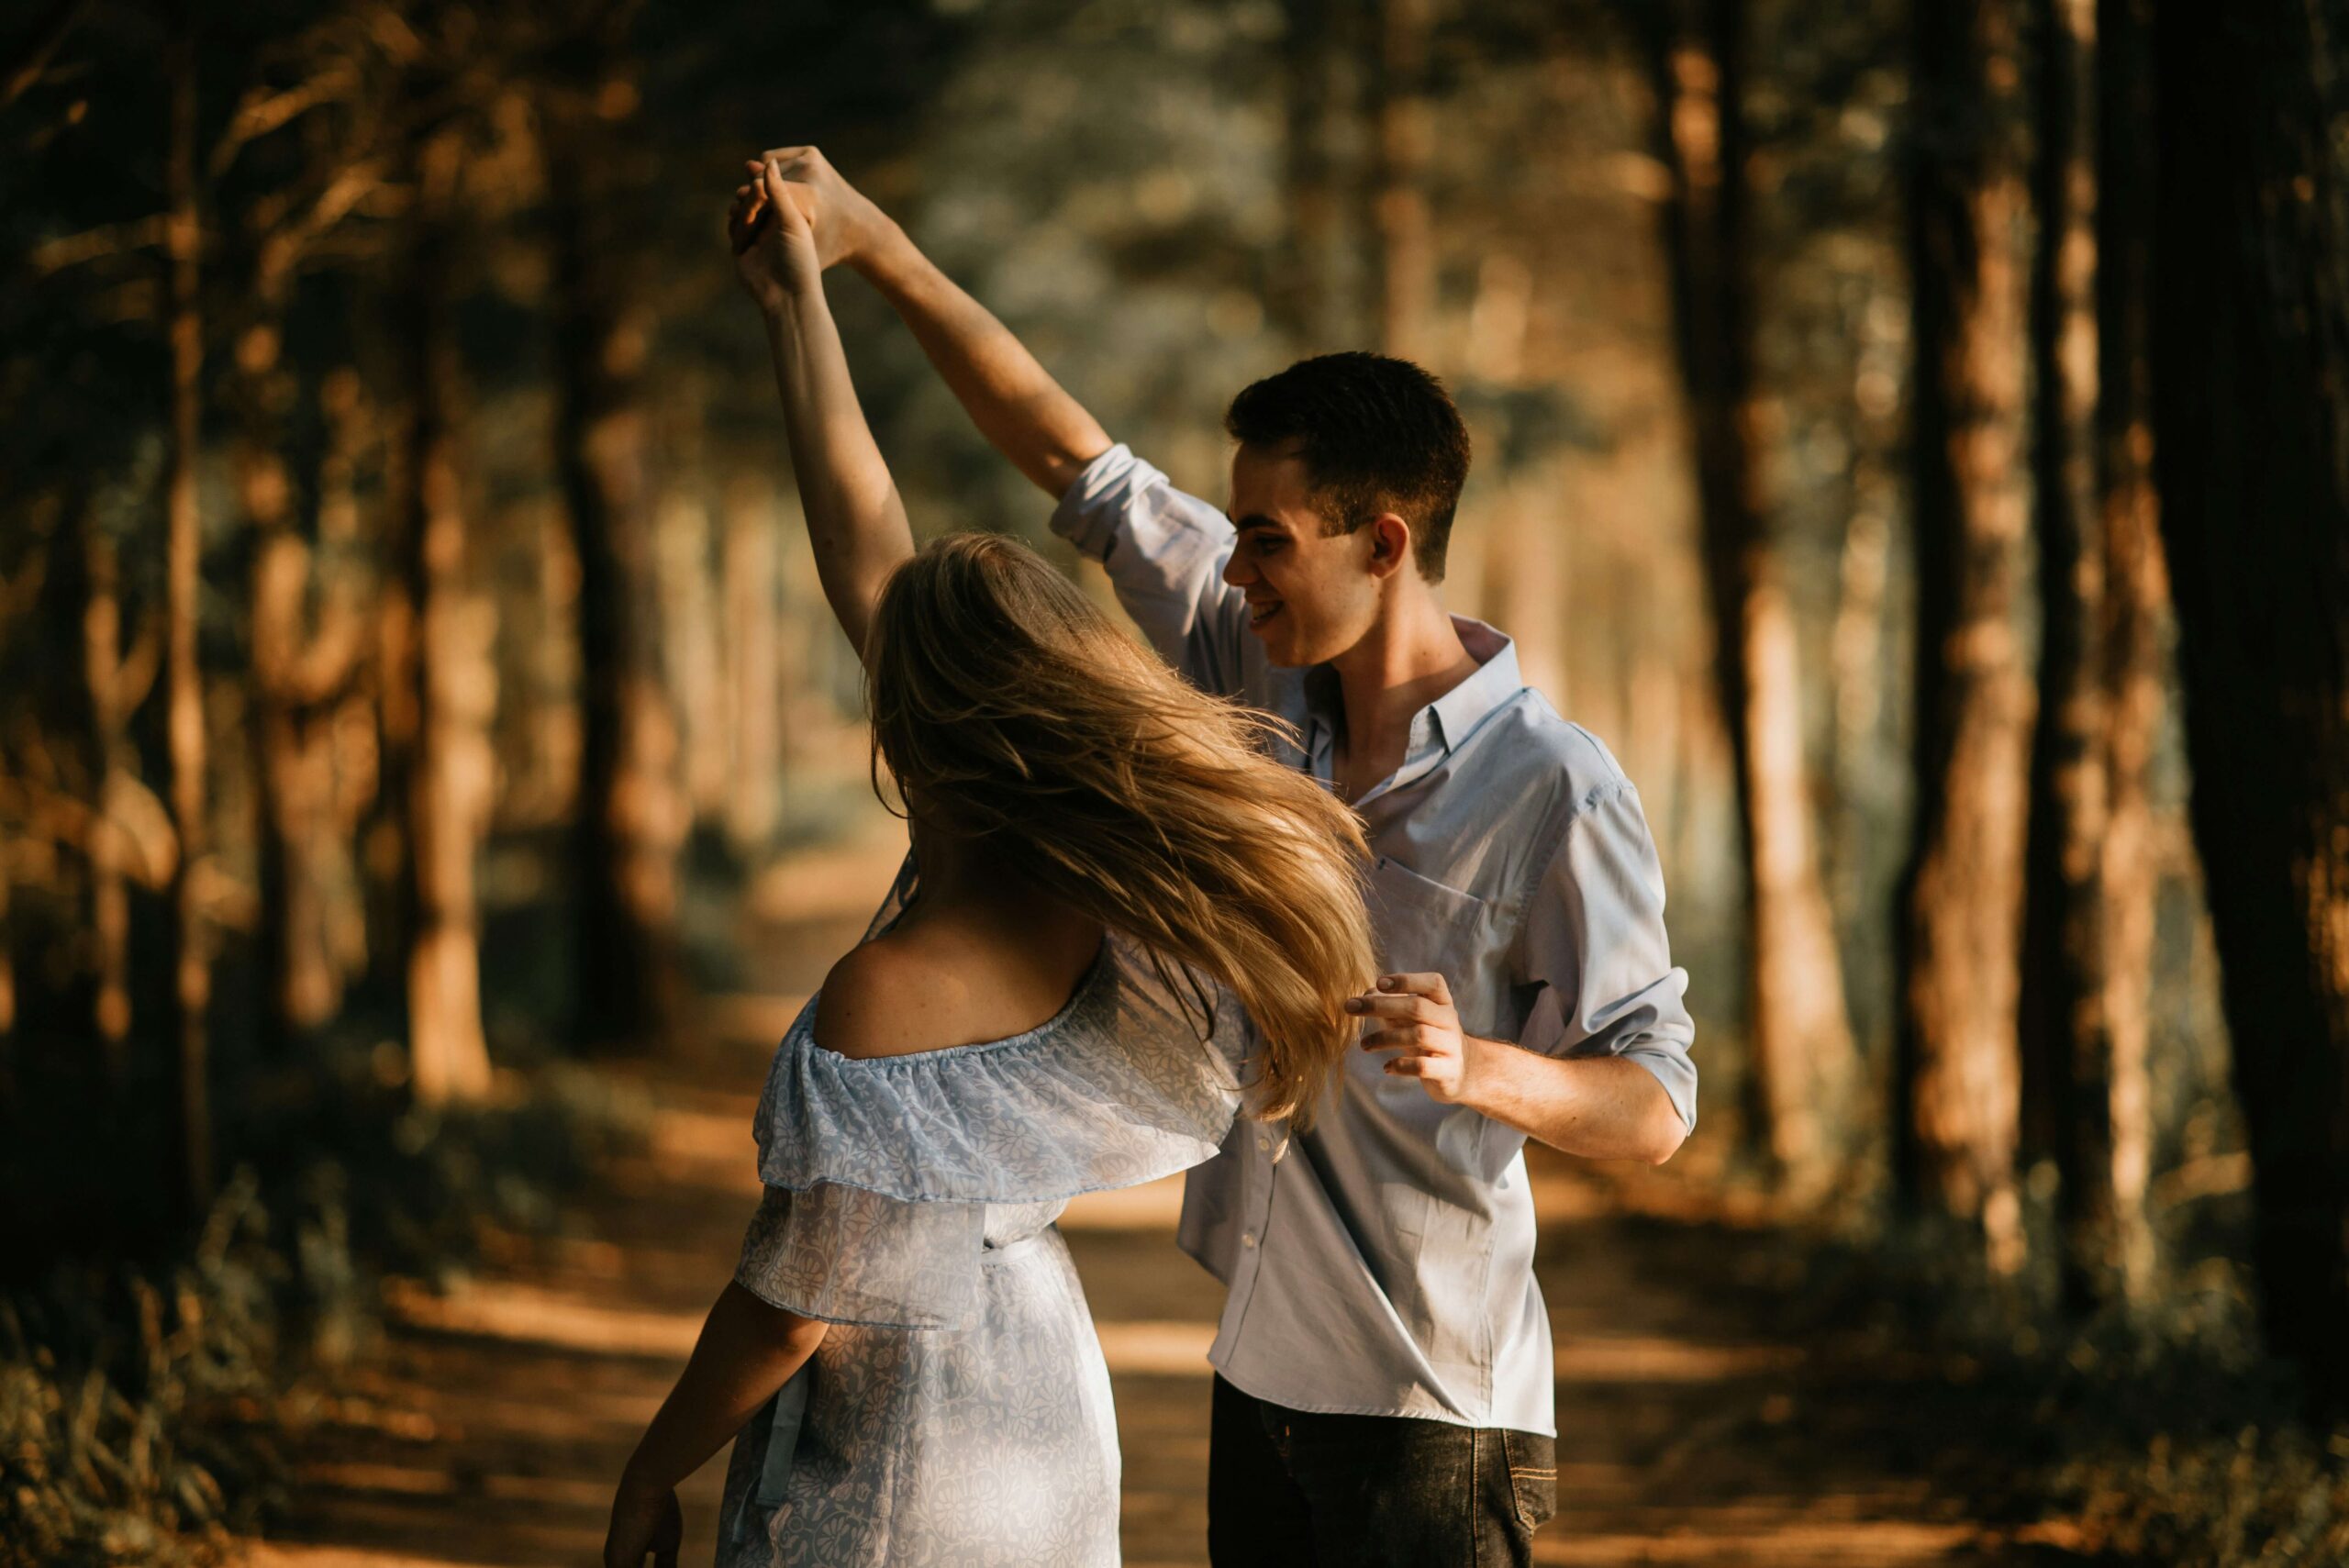 man and woman dancing in aisle of trees